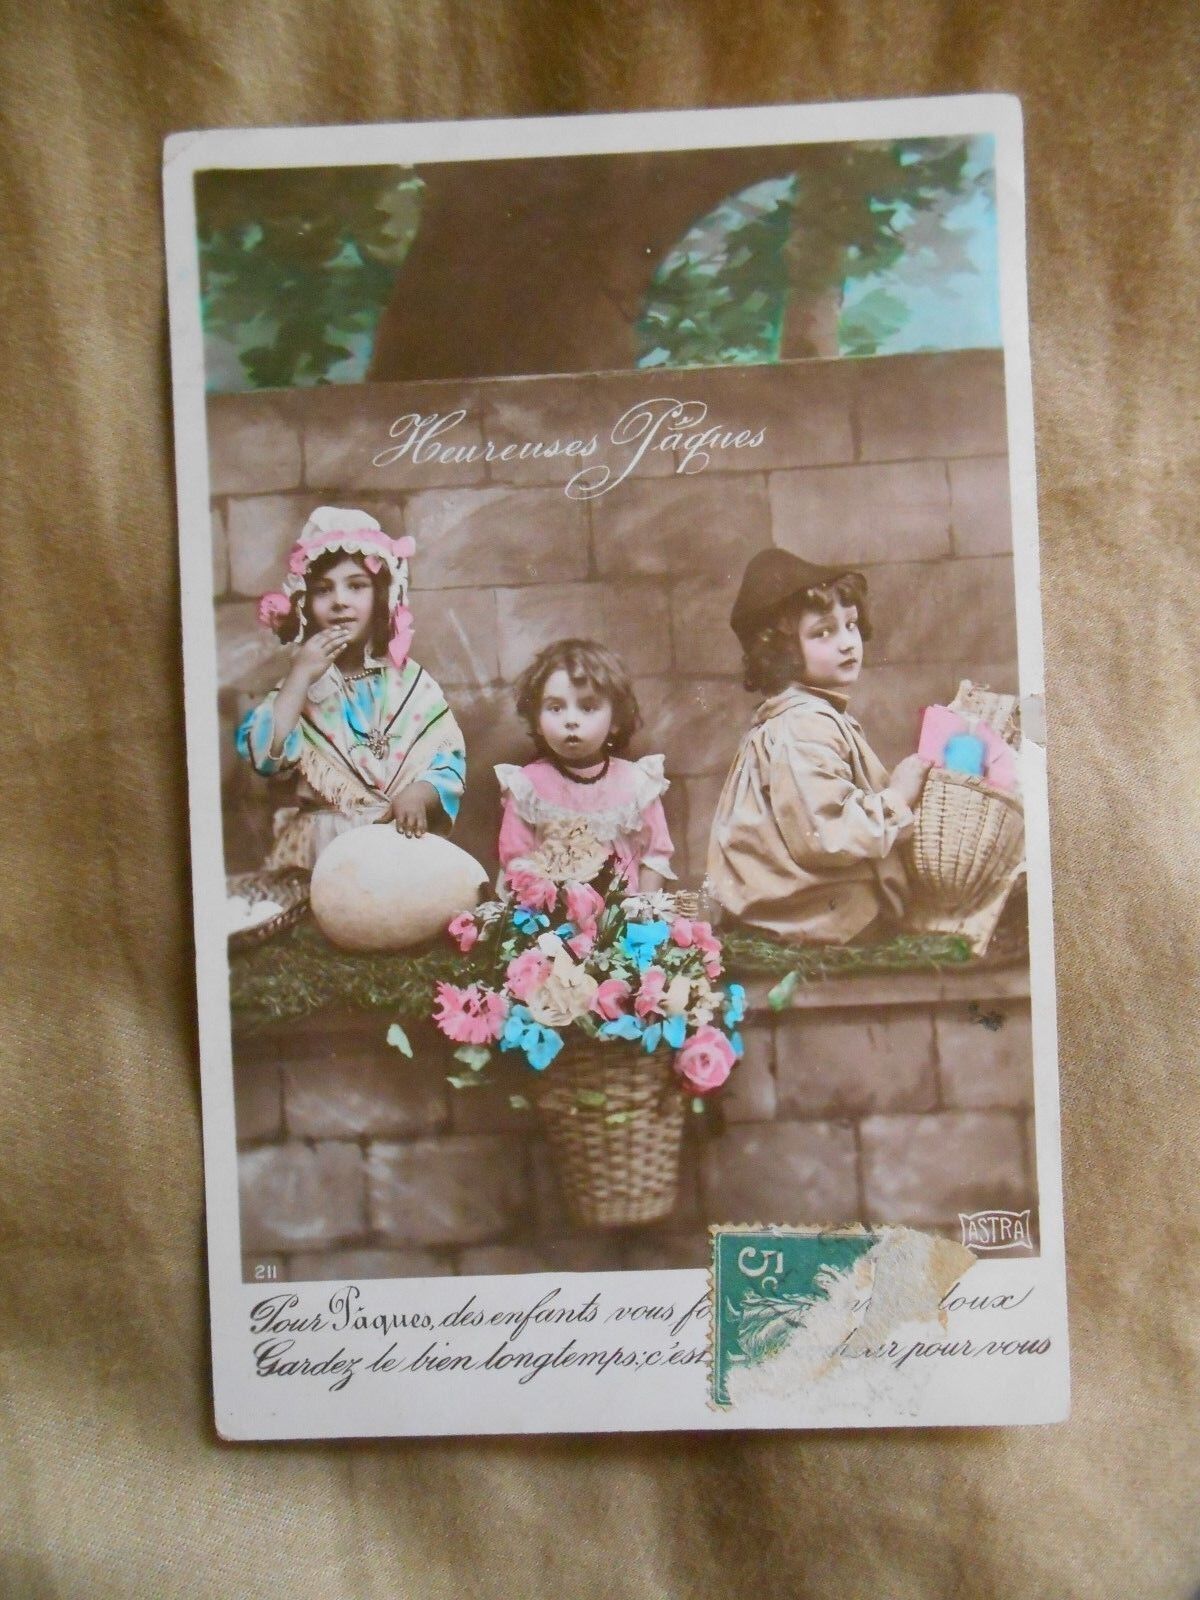 Old Vintage or Antique Postcard 1910 Heureuses Paques Happy Easter French ASTRA